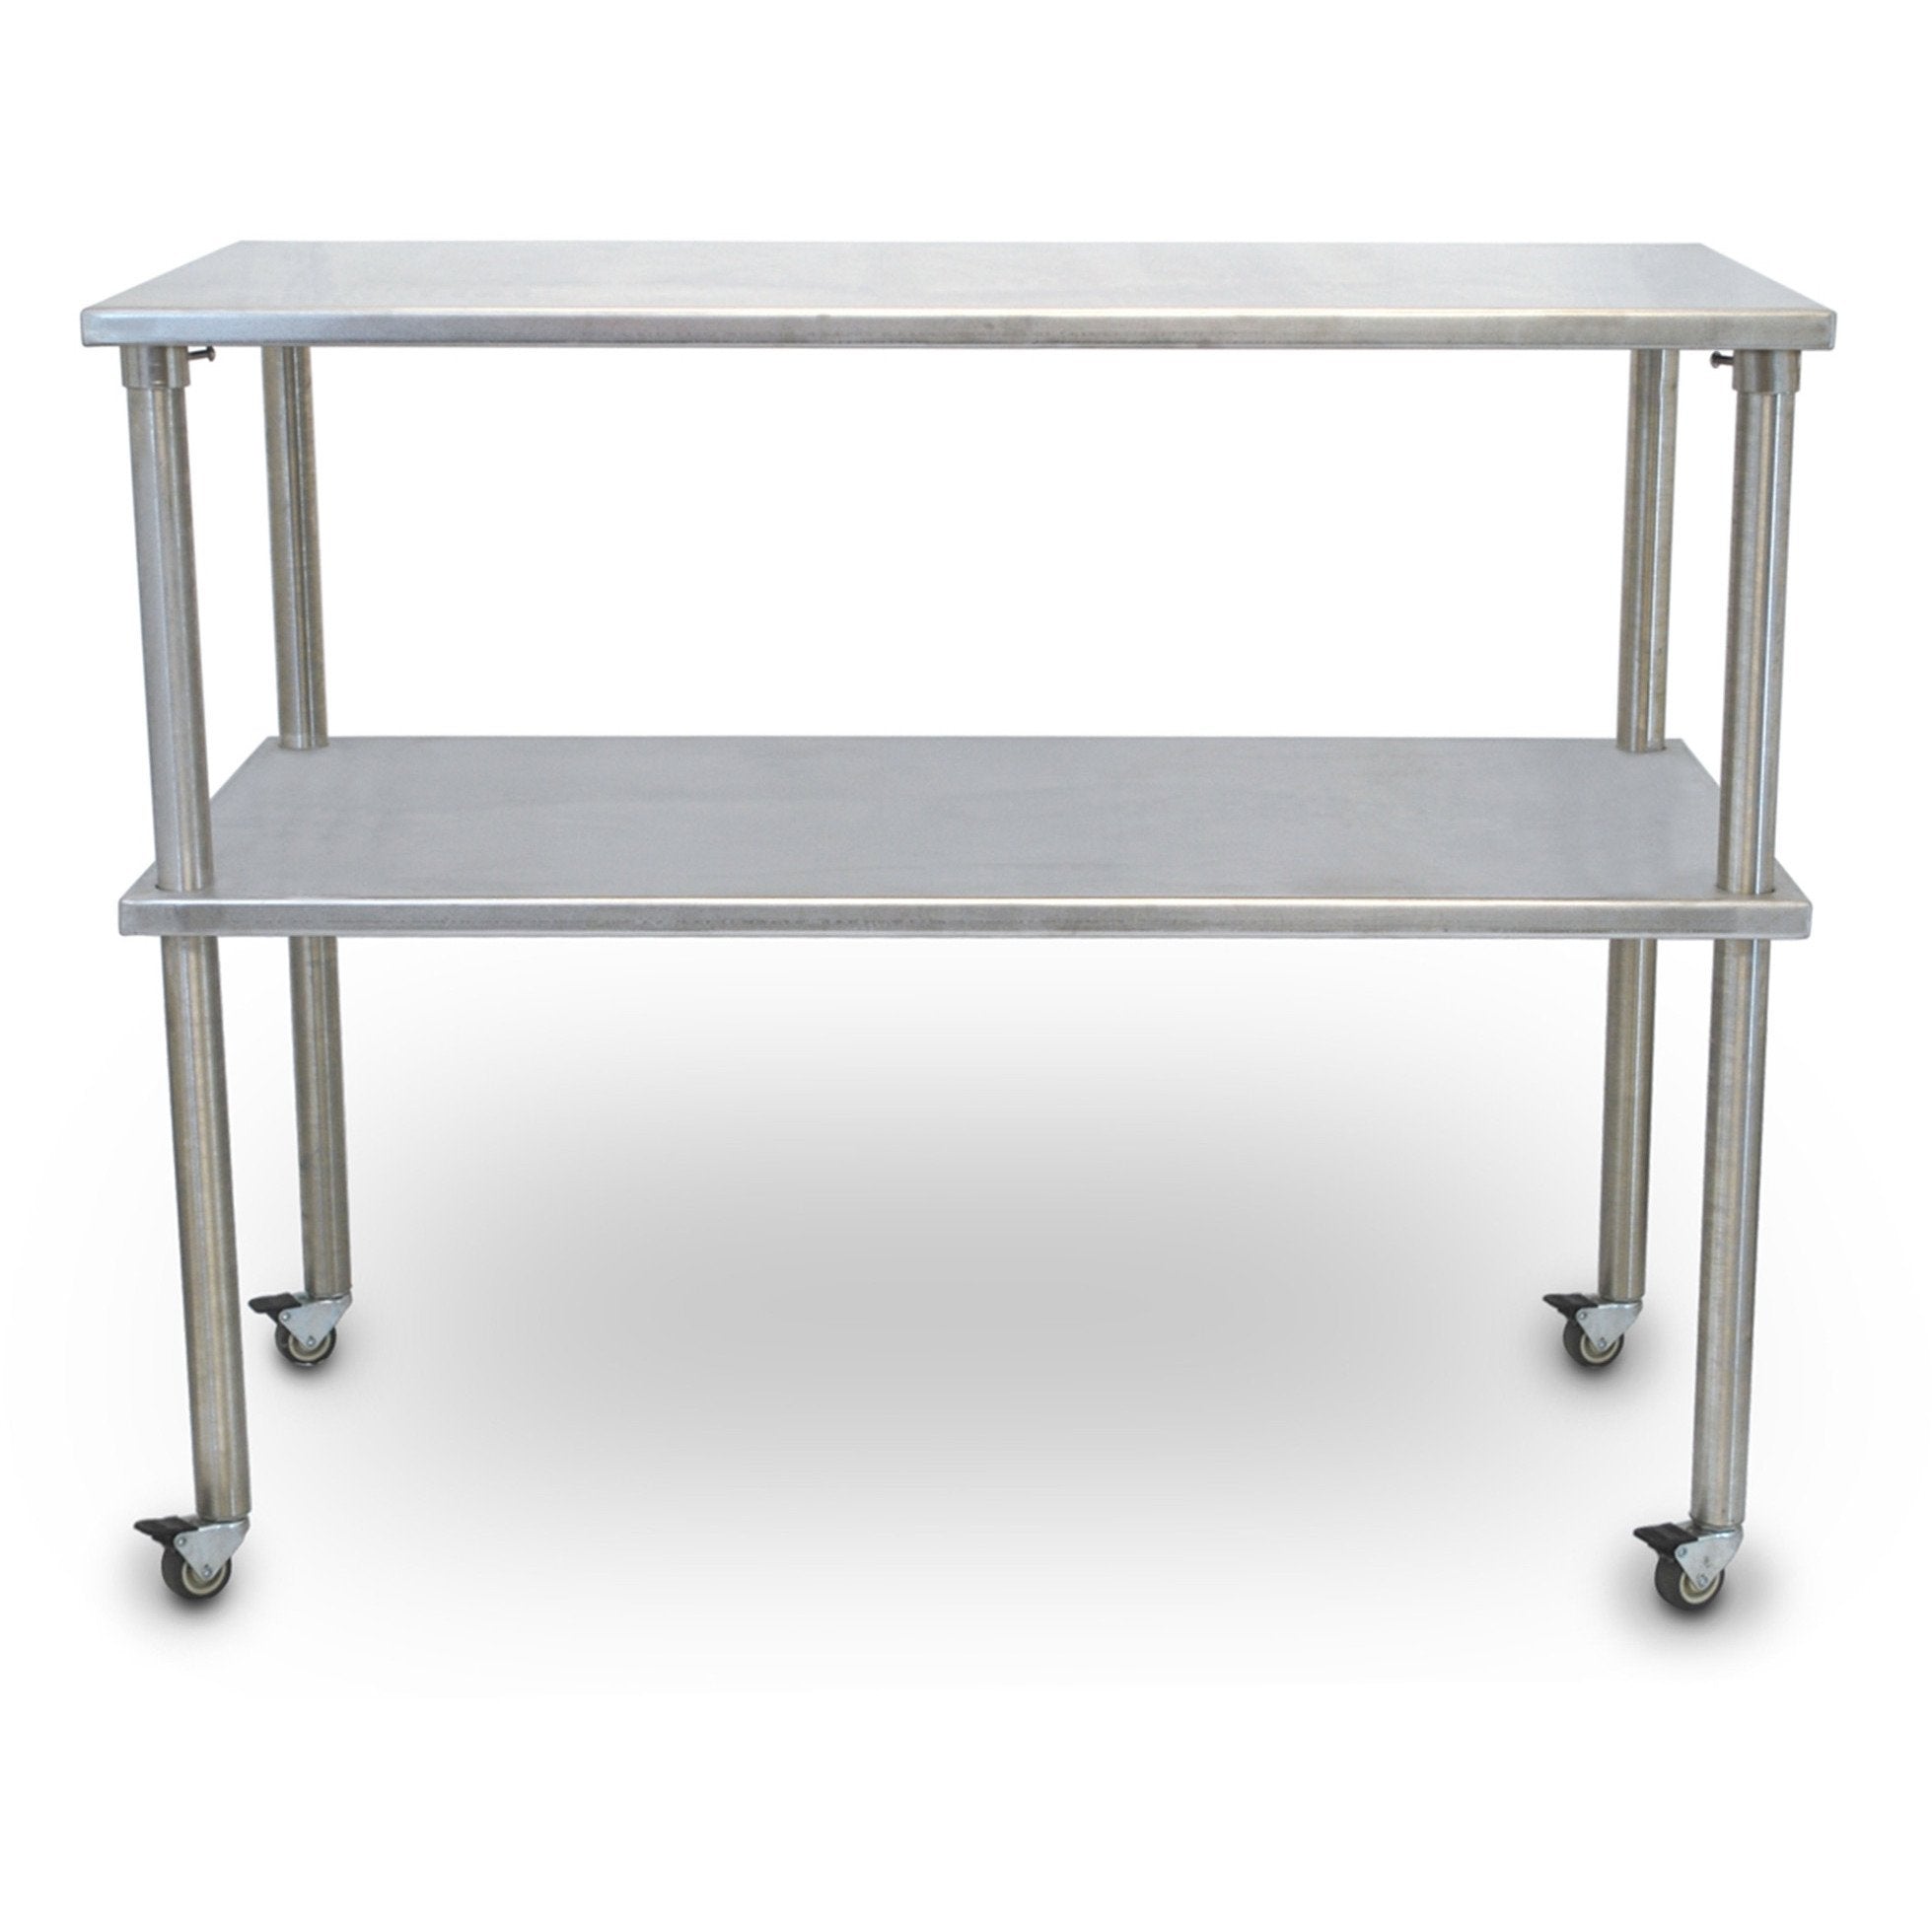 Groomer's Best Stainless Steel Veterinary Mobile Utility Table with Shelf